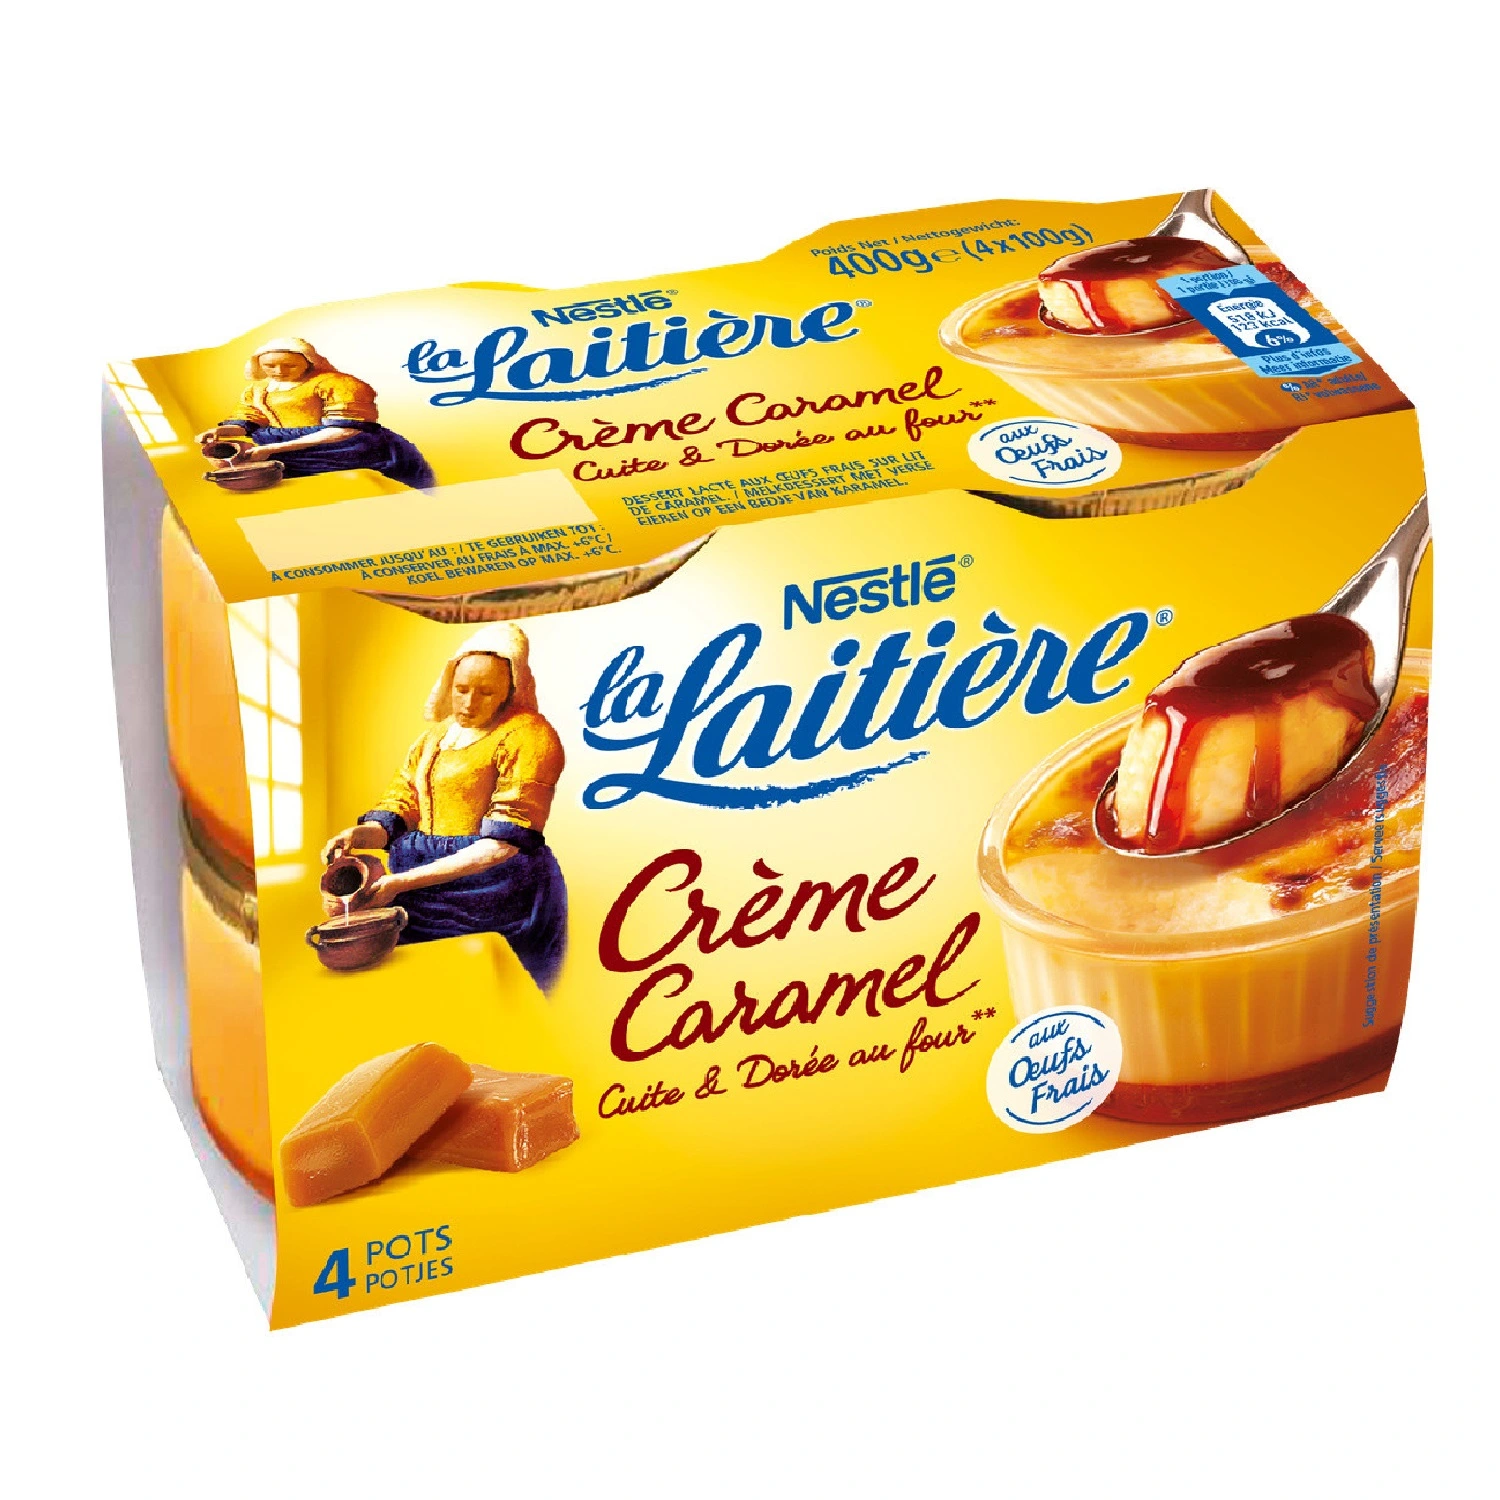 La Laitiere caramel creme oven cooked 4x100g